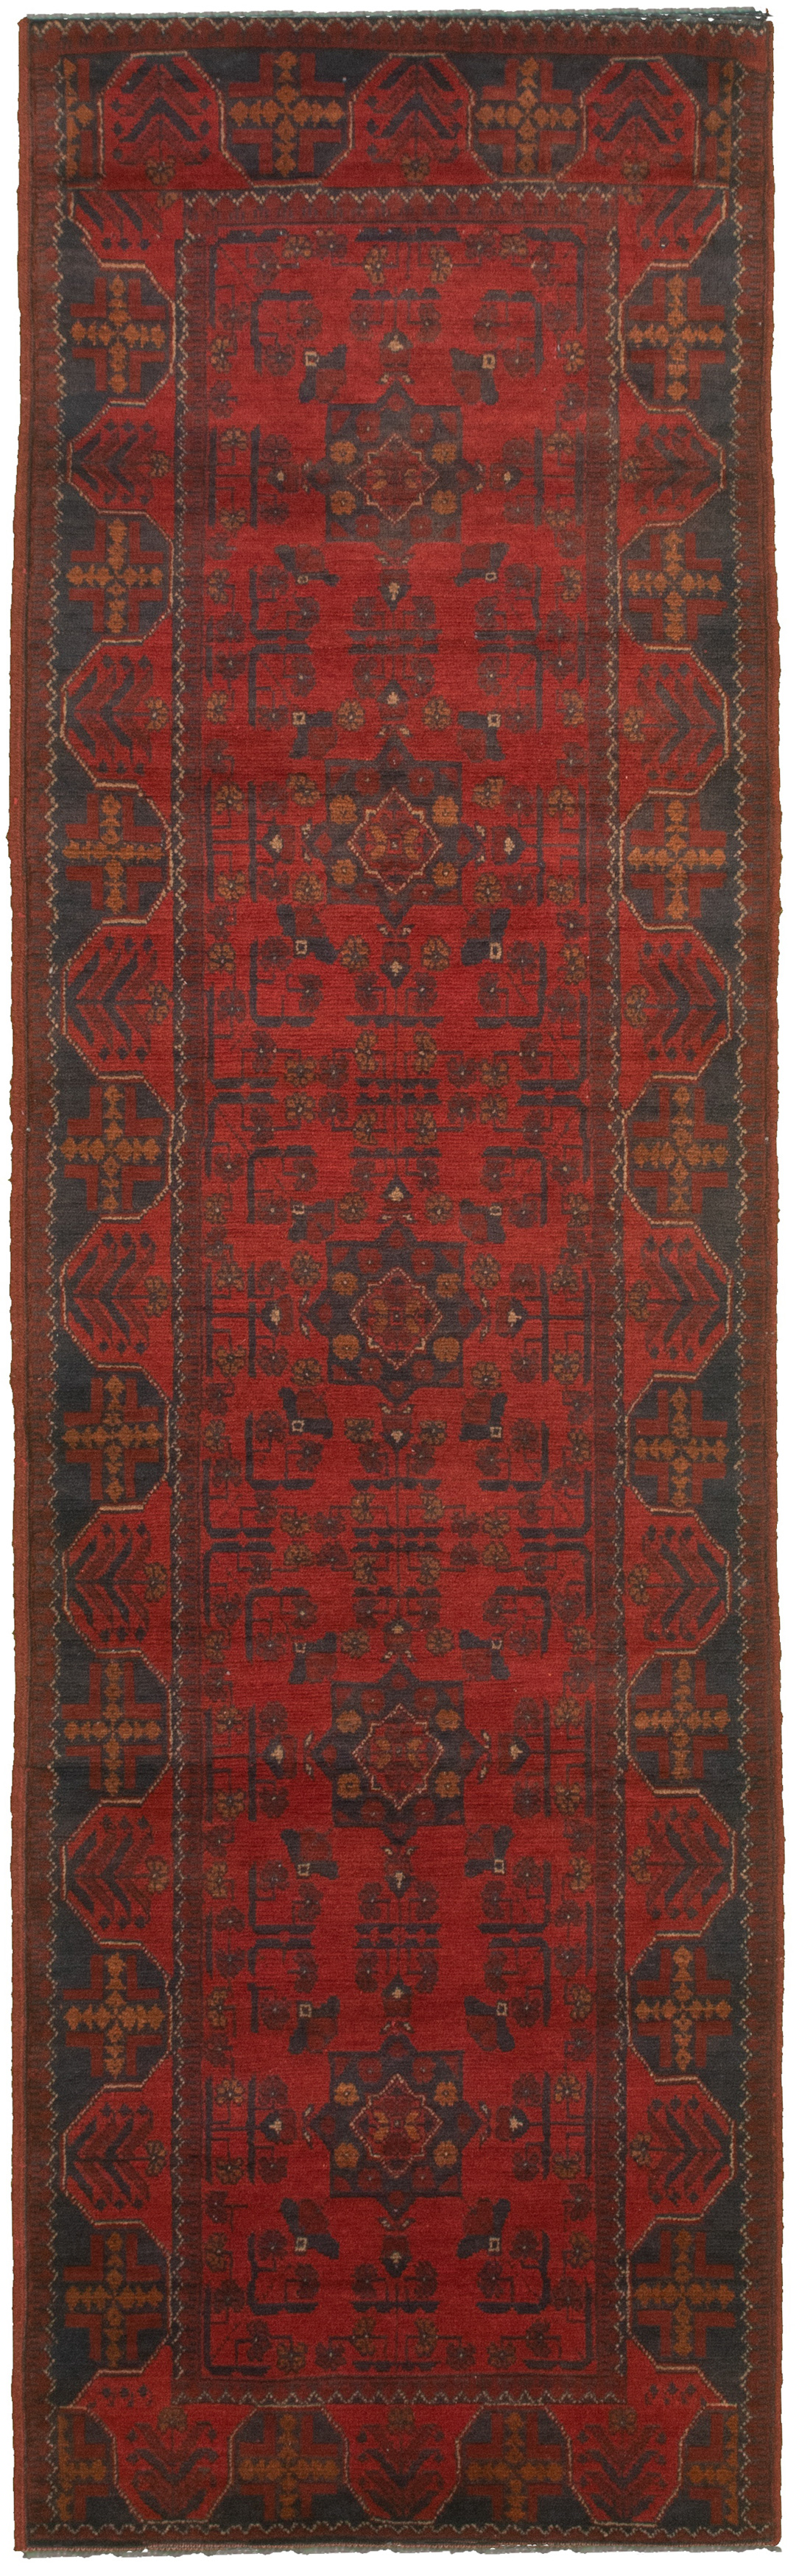 Hand-knotted Finest Khal Mohammadi Red  Rug 2'8" x 9'6" Size: 2'8" x 9'6"  